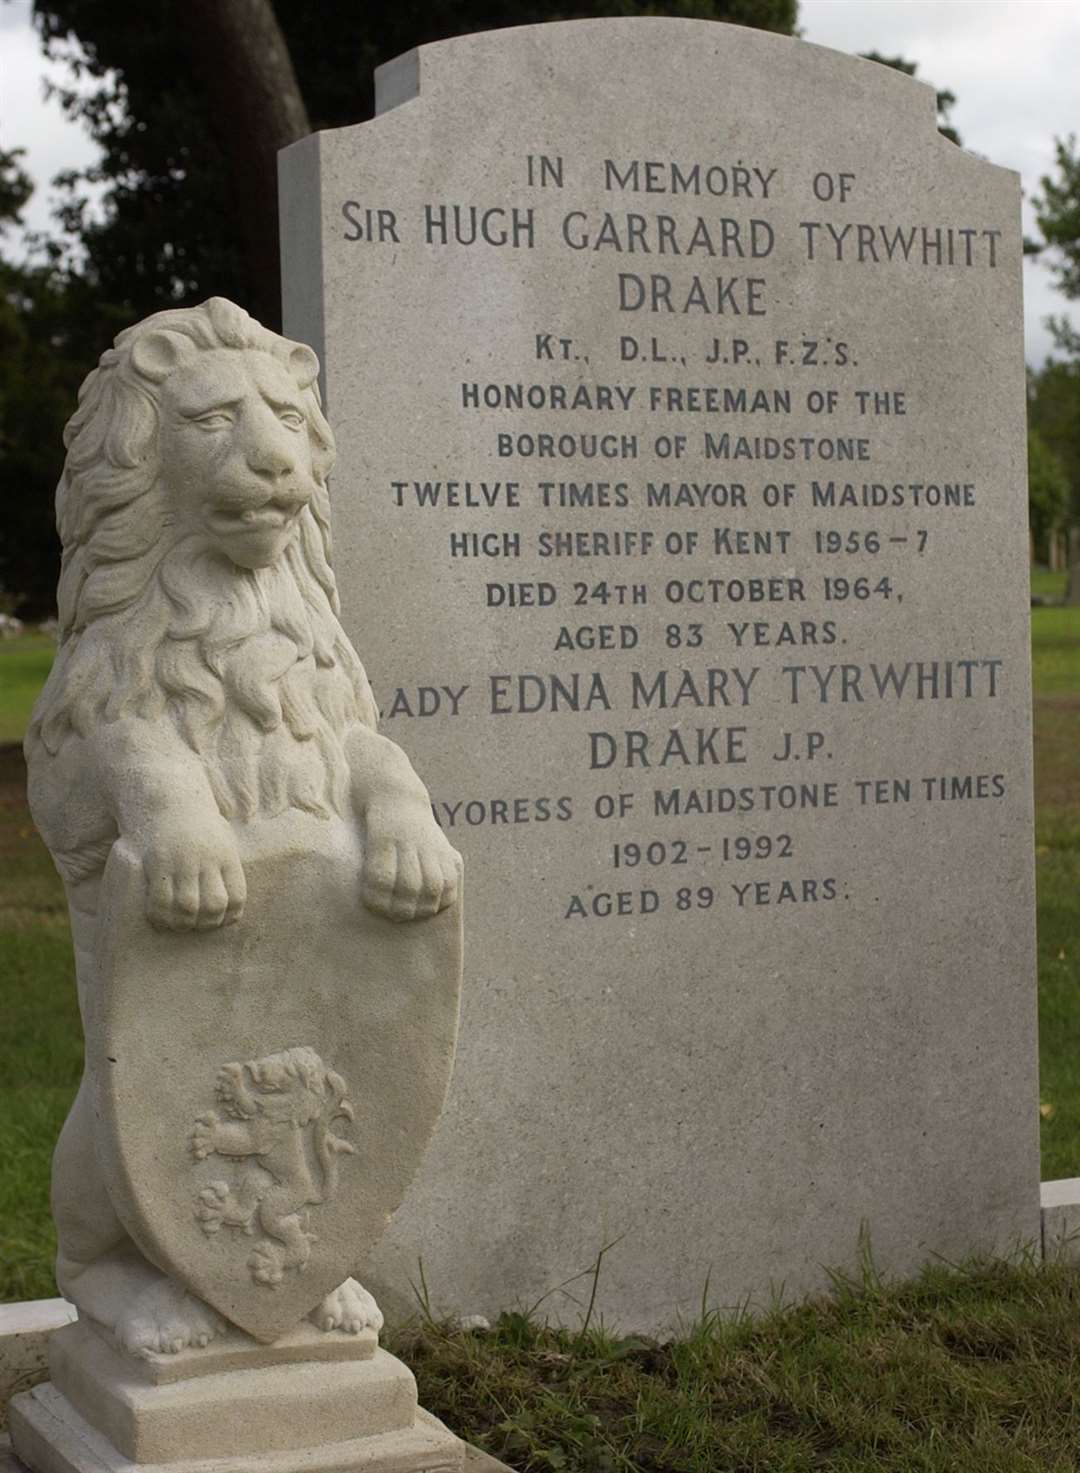 Sir Garrard is buried in Maidstone Cemetery with his wife, Lady Edna